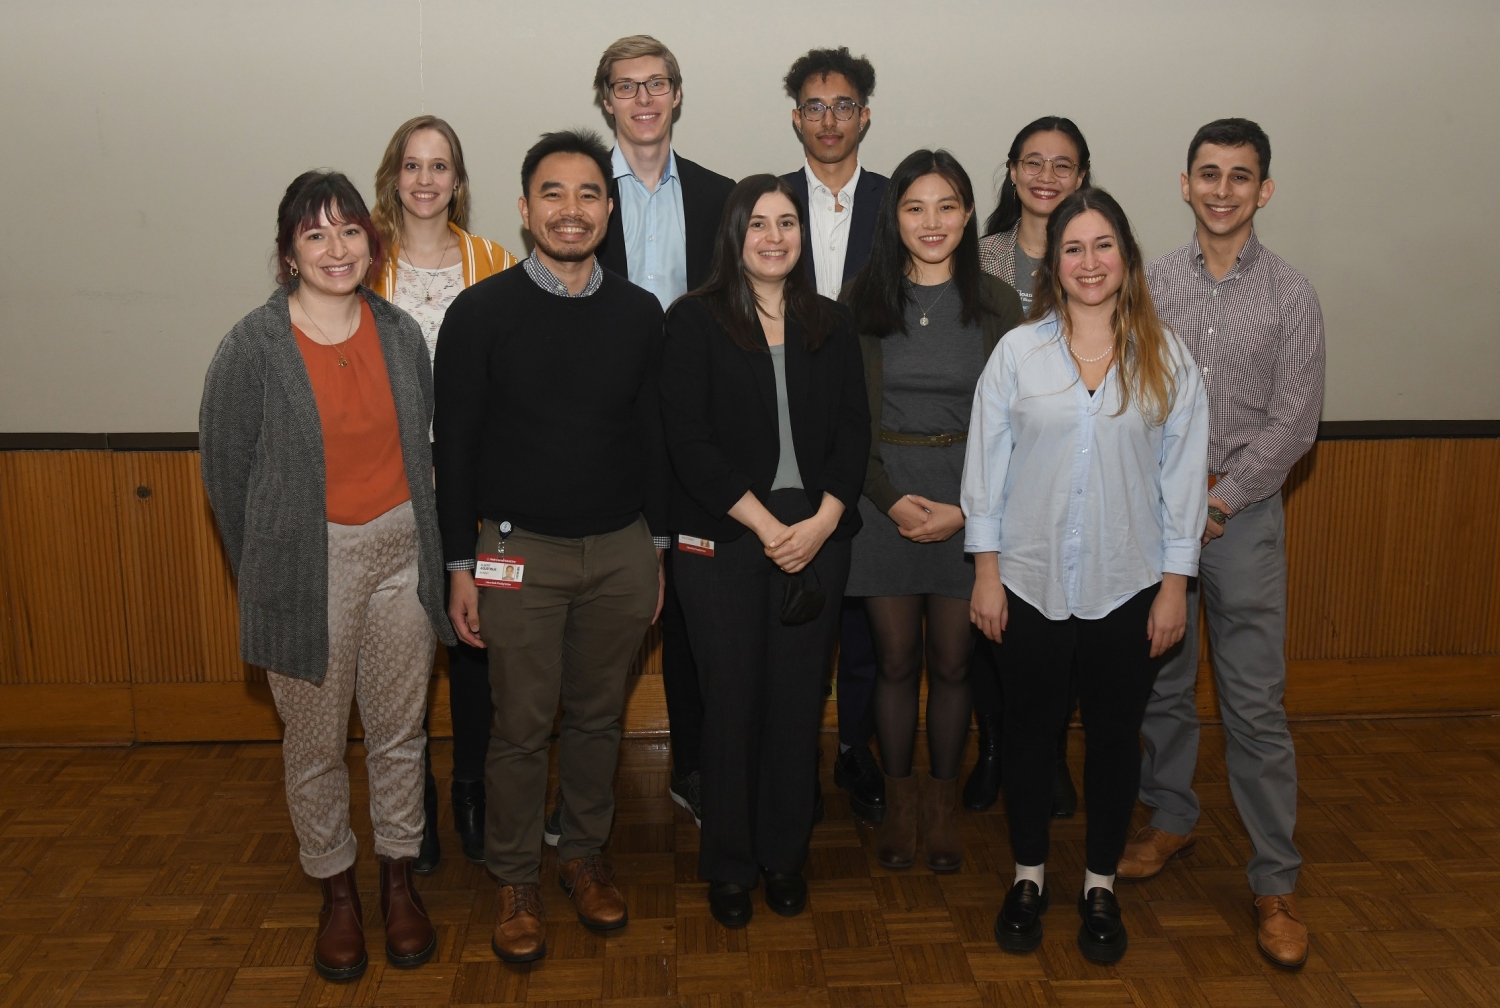 Ten doctoral candidates pose in during the Three Minute Thesis event.